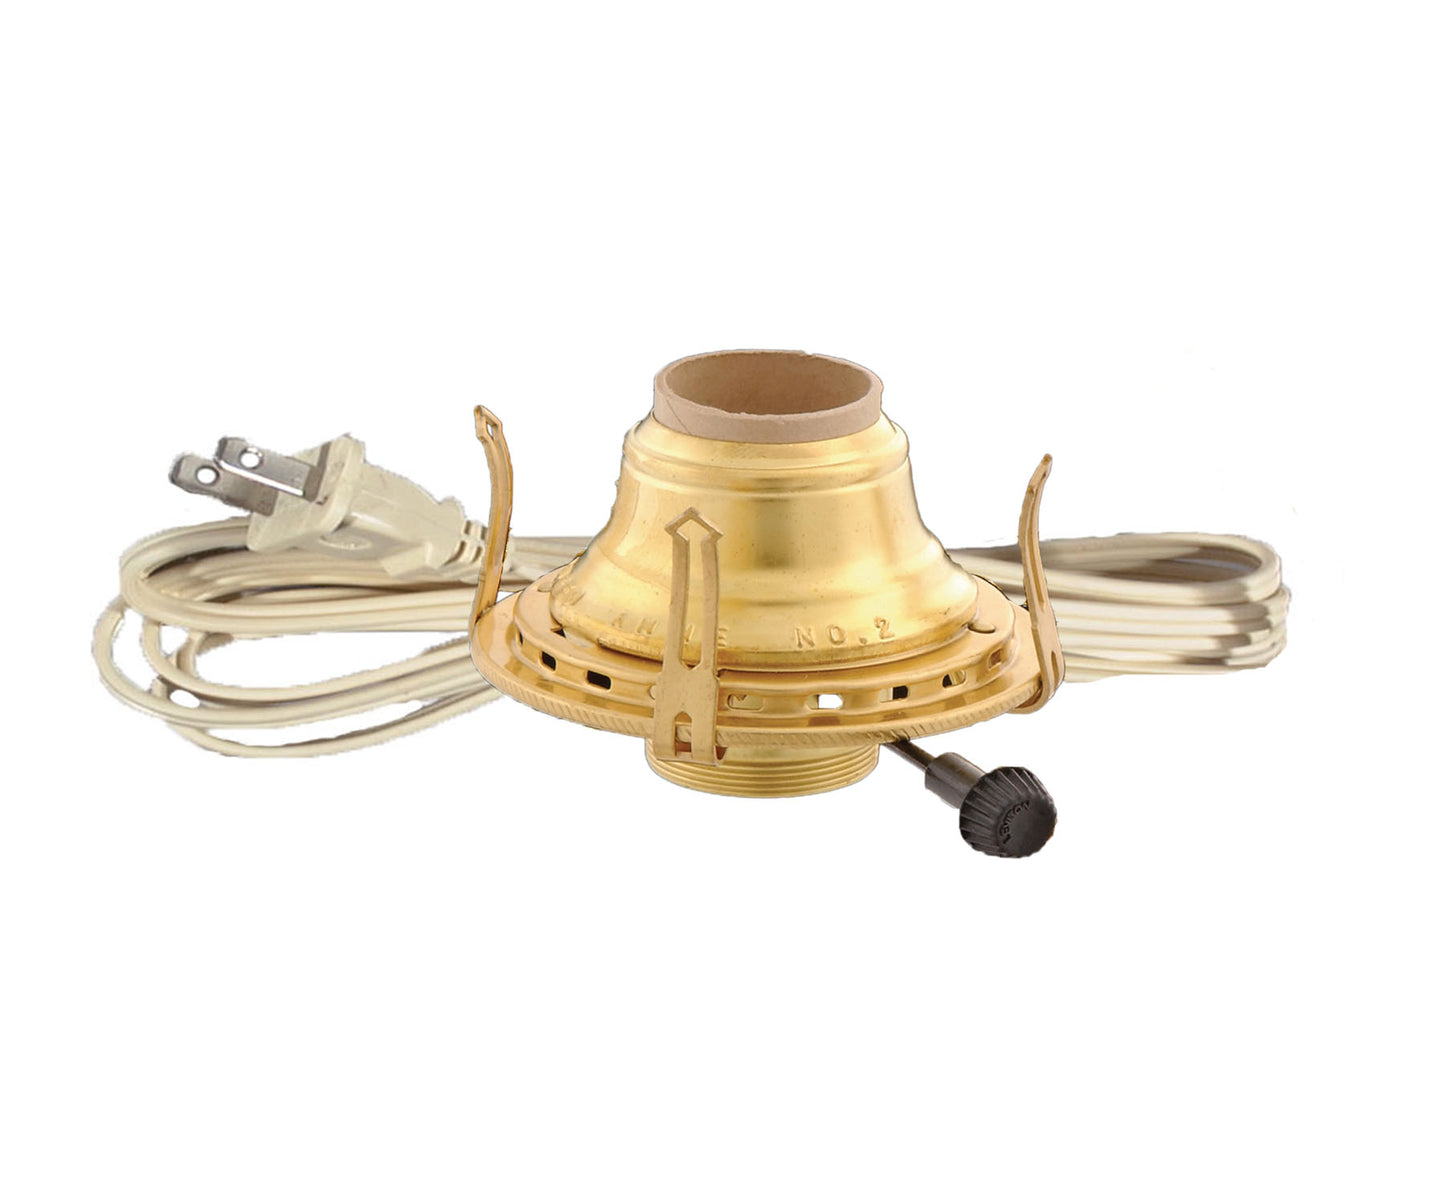 Solid Brass #2 Queen Electrified Lamp Burner, Choice of Cord Color (30211)